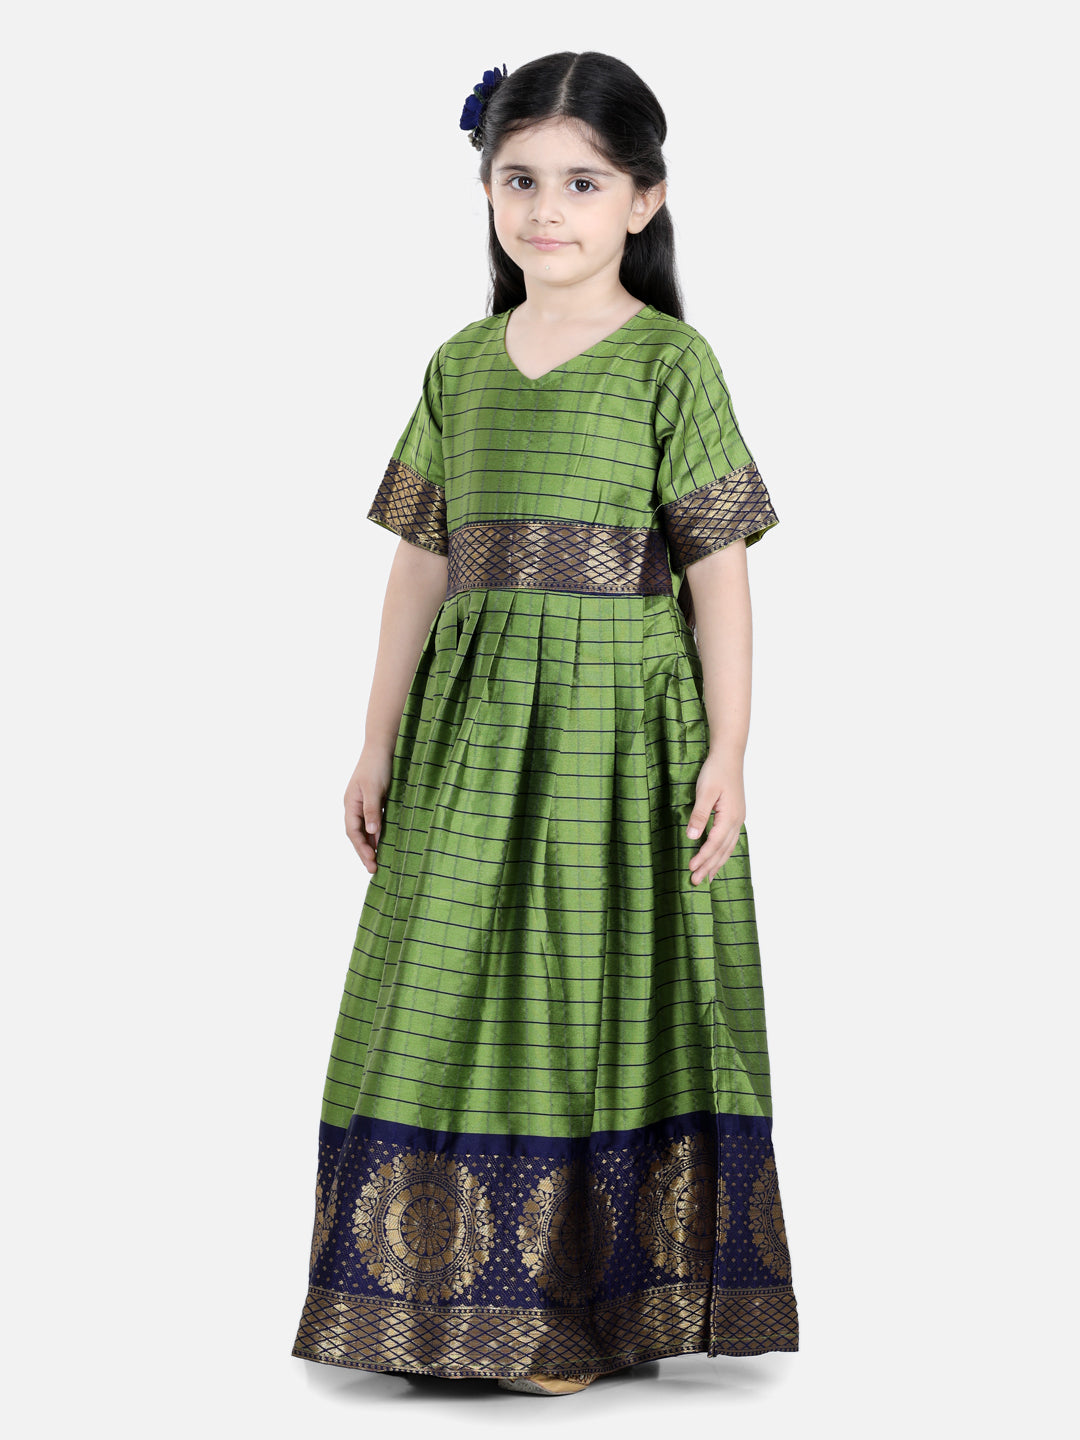 Girls Silk South Indian Party Long Dress - Green NOZ2TOZ - Made In INDIA.